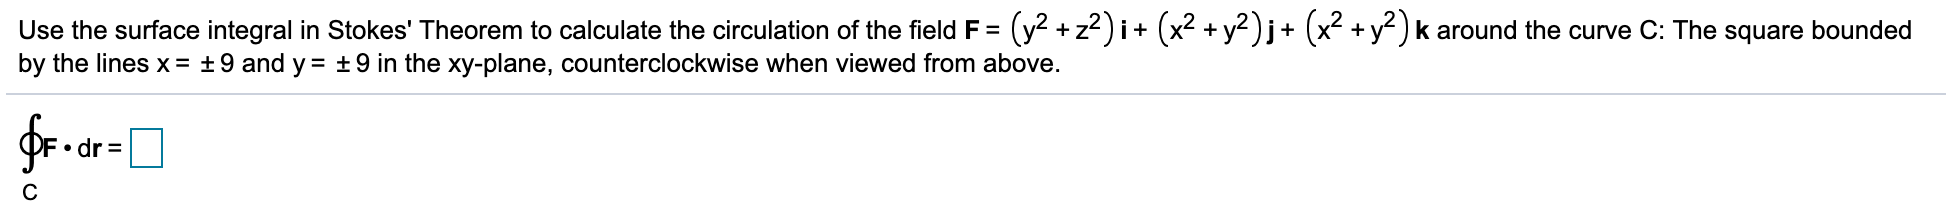 Use the surface integral in Stokes' Theorem to calculate the circulation of the field F =
by the lines x= +9 and y = ±9 in the xy-plane, counterclockwise when viewed from above.
(y? + z?) i+ (x2 + y²)j+ (x² + y² ) k around the curve C: The square bounded
• dr =
